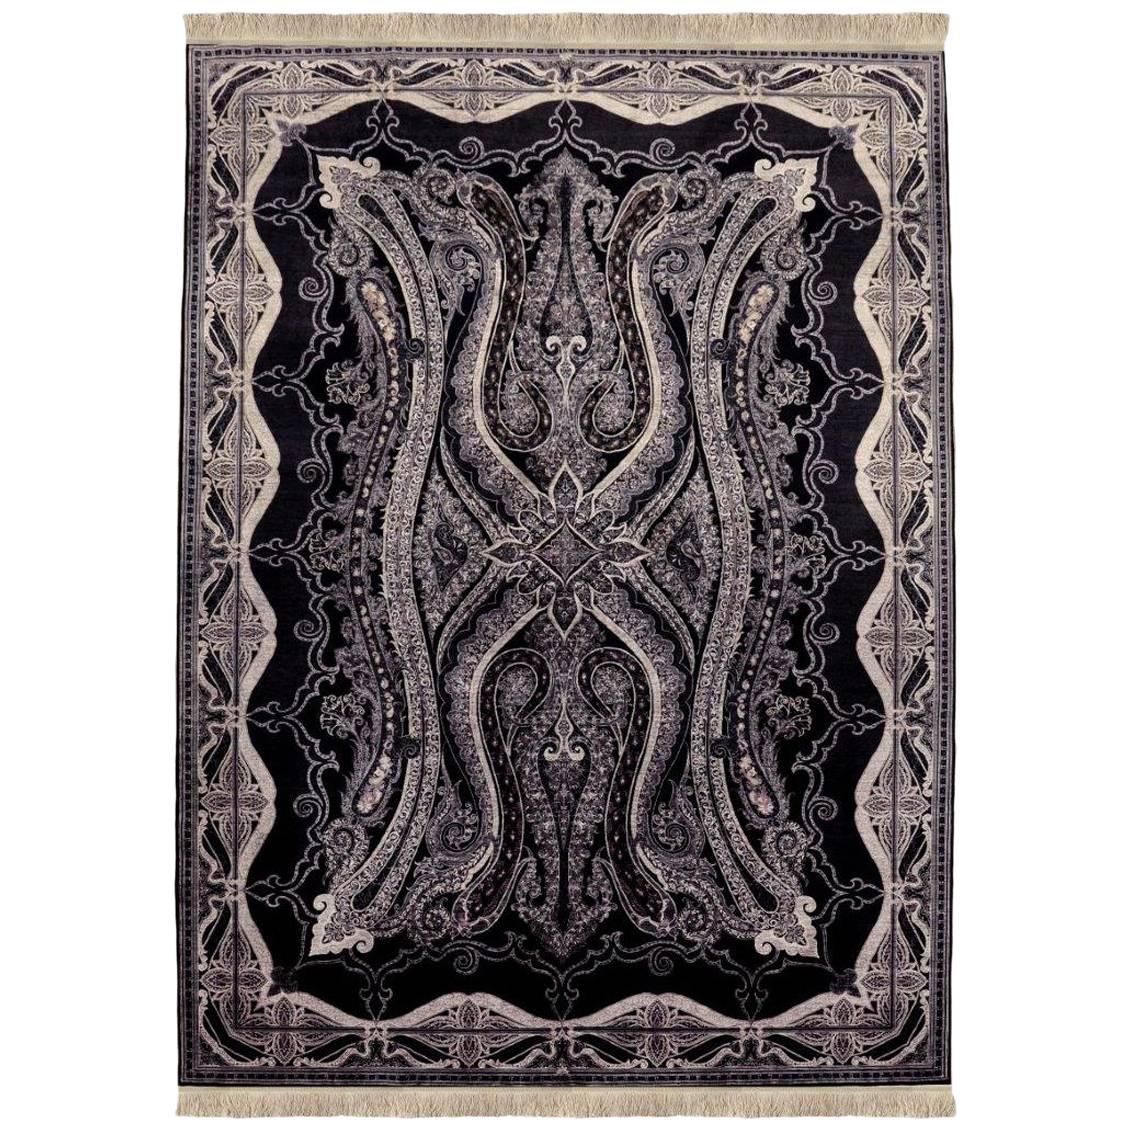 Unique 'King's Crest' Solid Silk Hand-Made Turkish Rug by Cinar For Sale